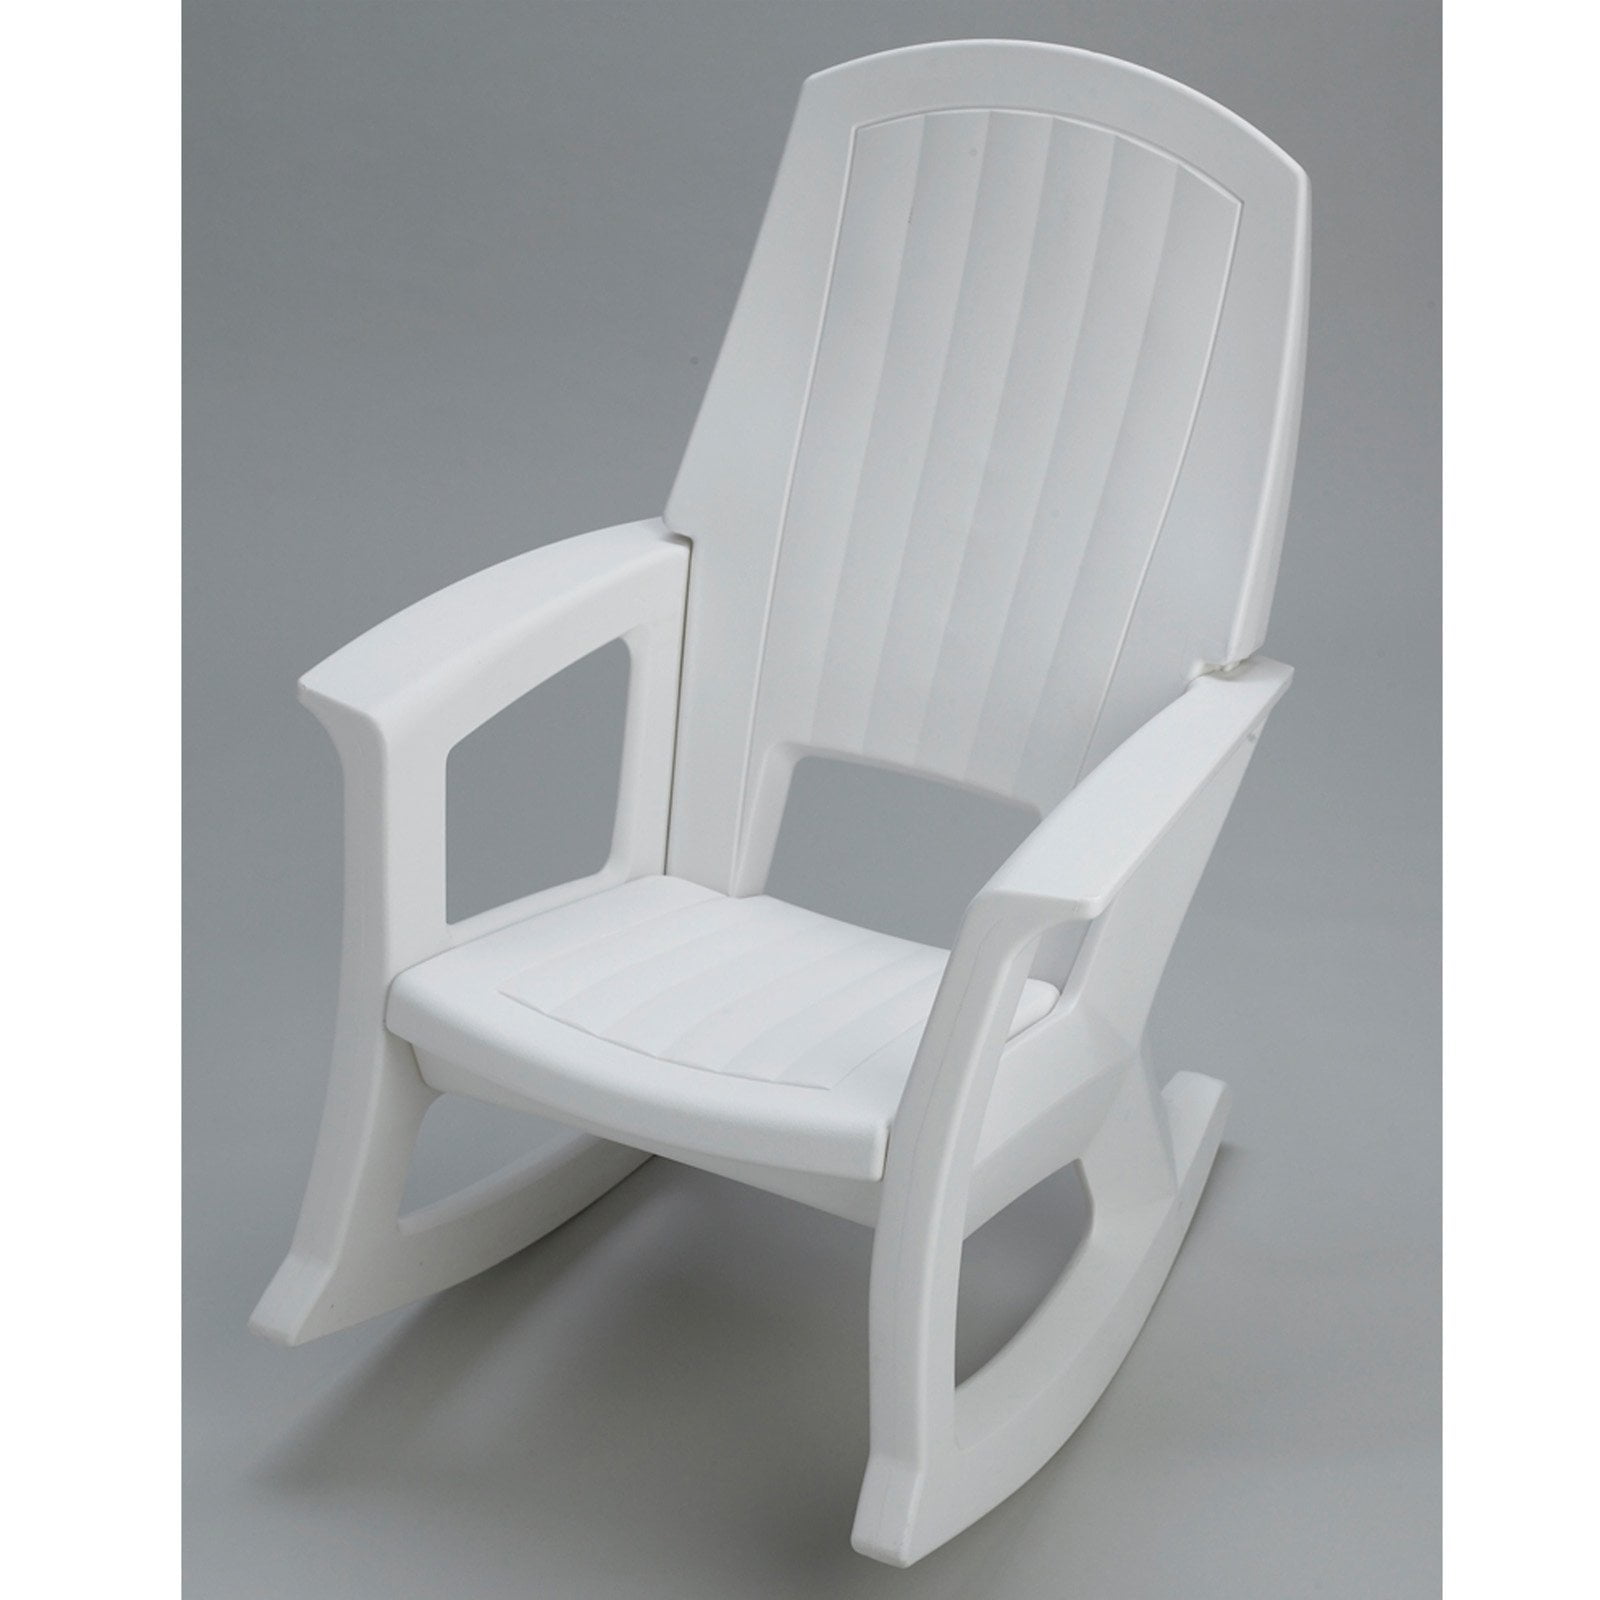 Semco Recycled Plastic Rocking Chair, White Resin Outdoor Rocking Chairs